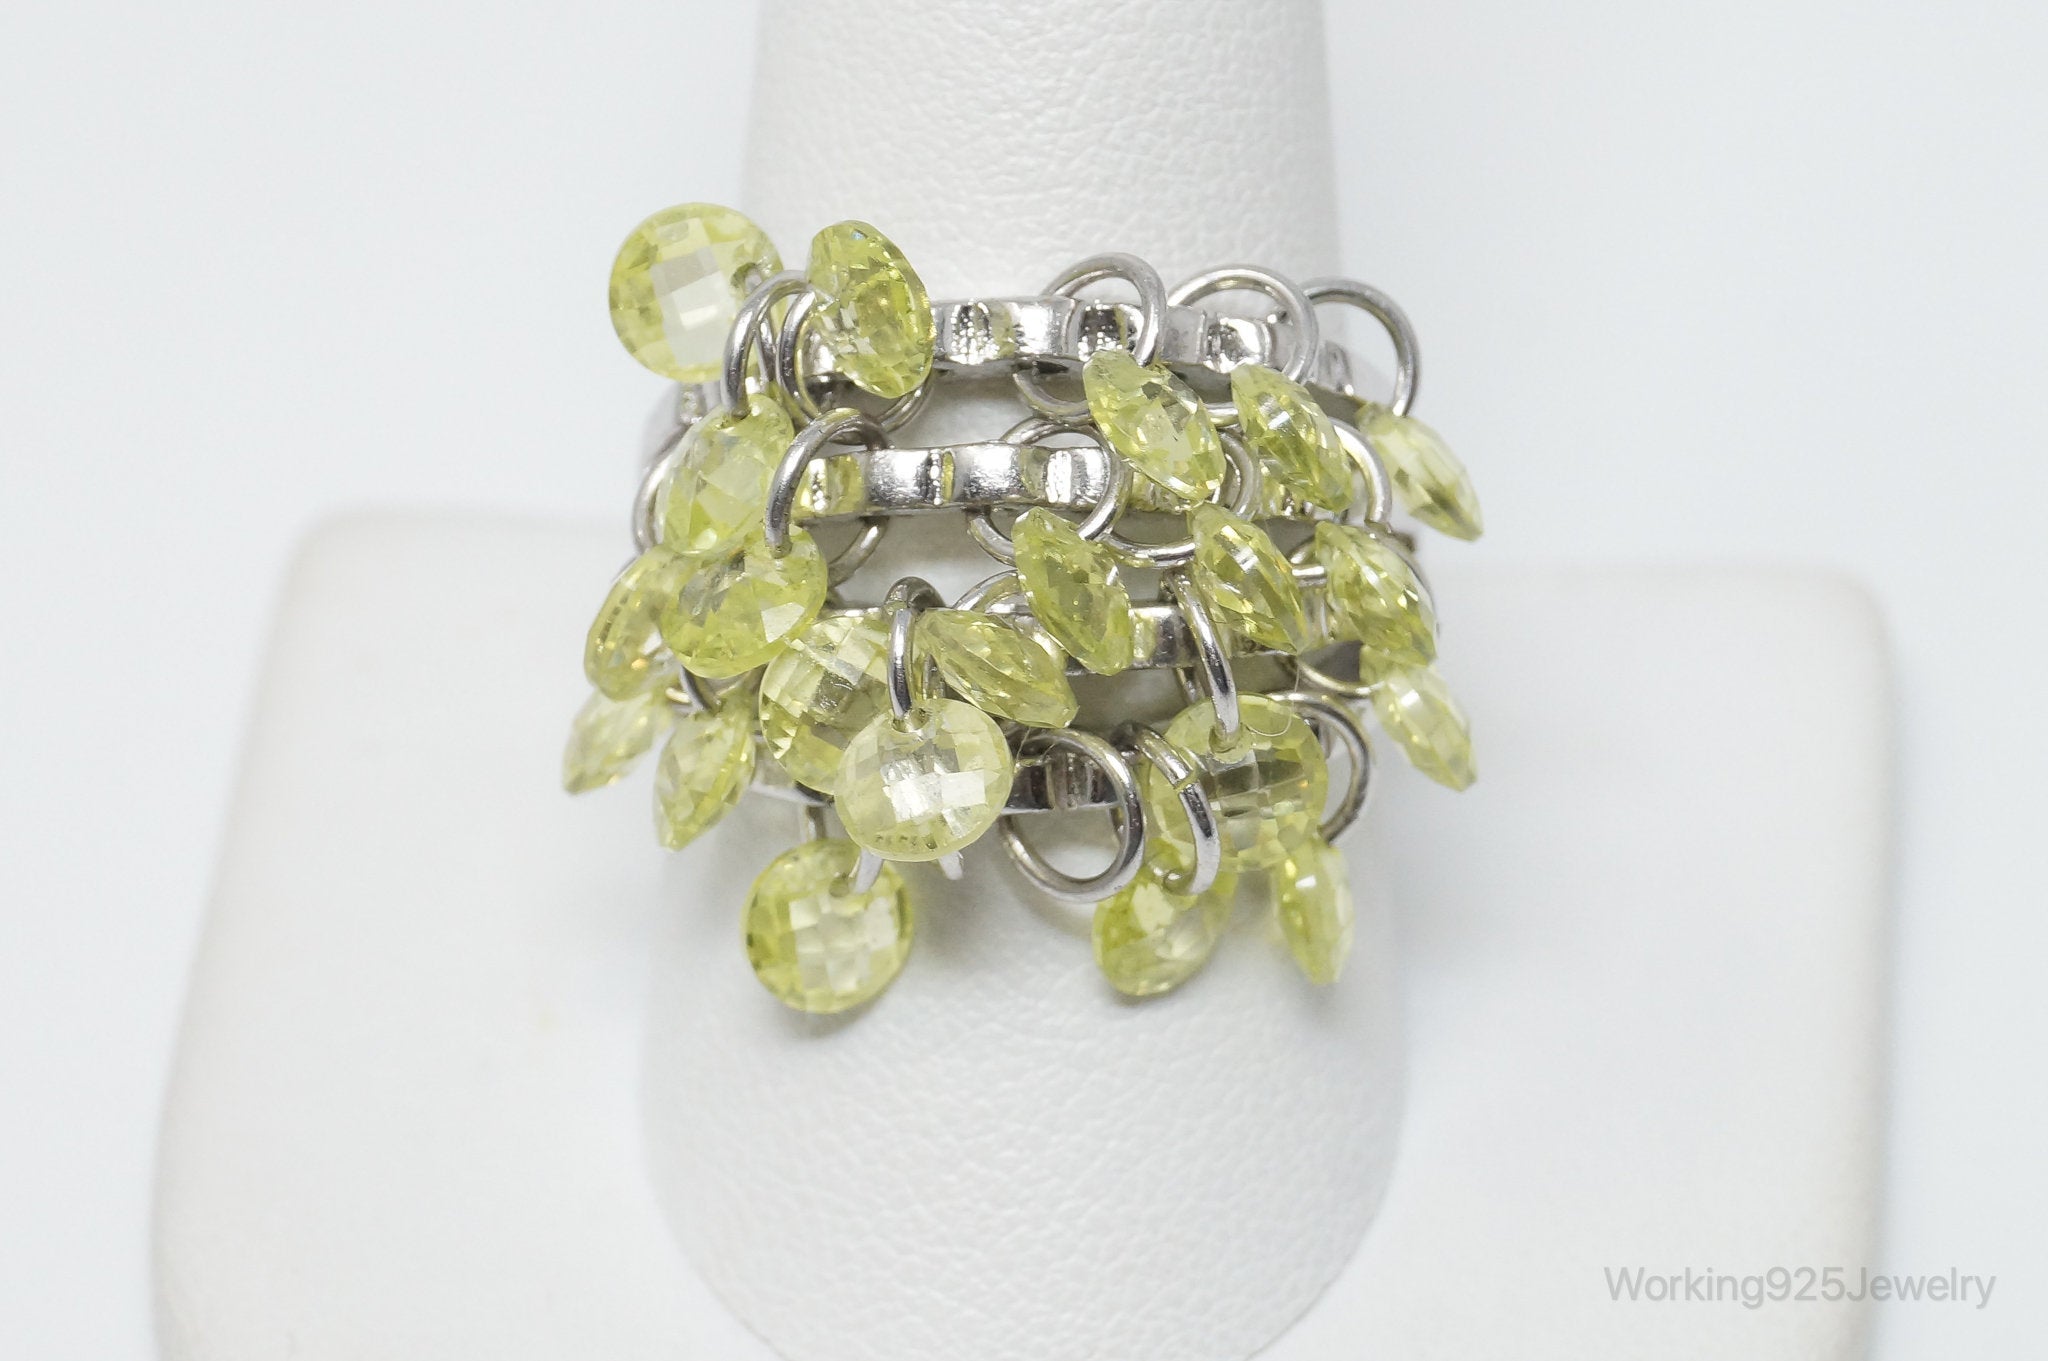 Vintage Peridot Dangling Gem Charms Sterling Silver Ring Size 10